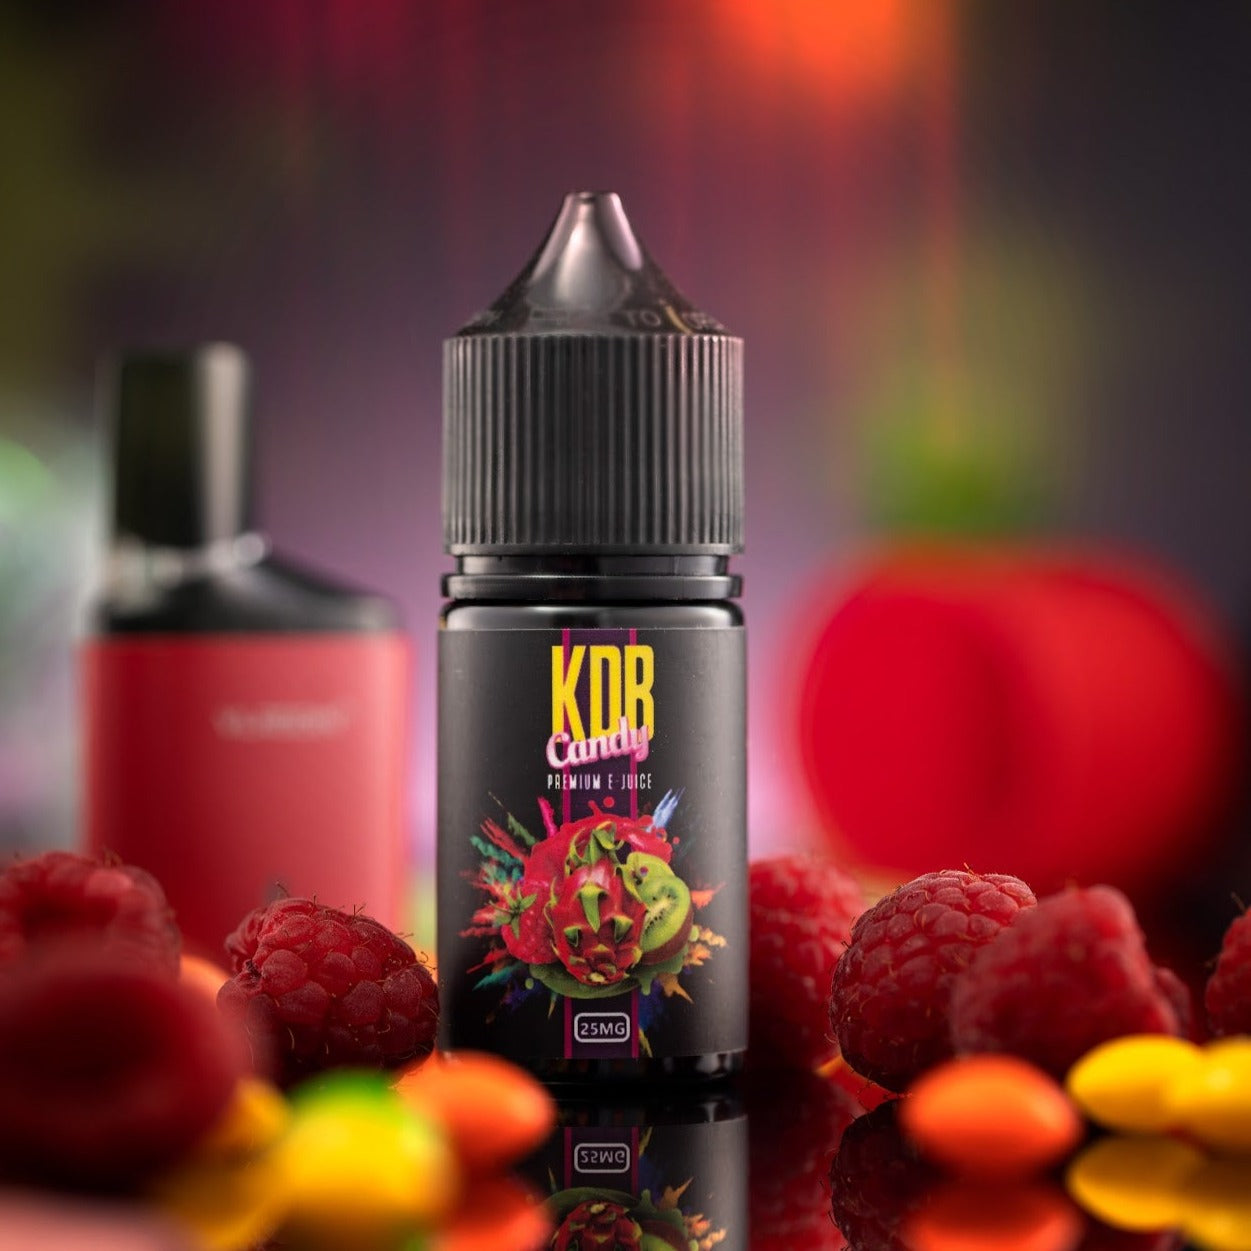 KDB Candy Saltnic E-Liquid by GRAND - A sugary vaping delight.